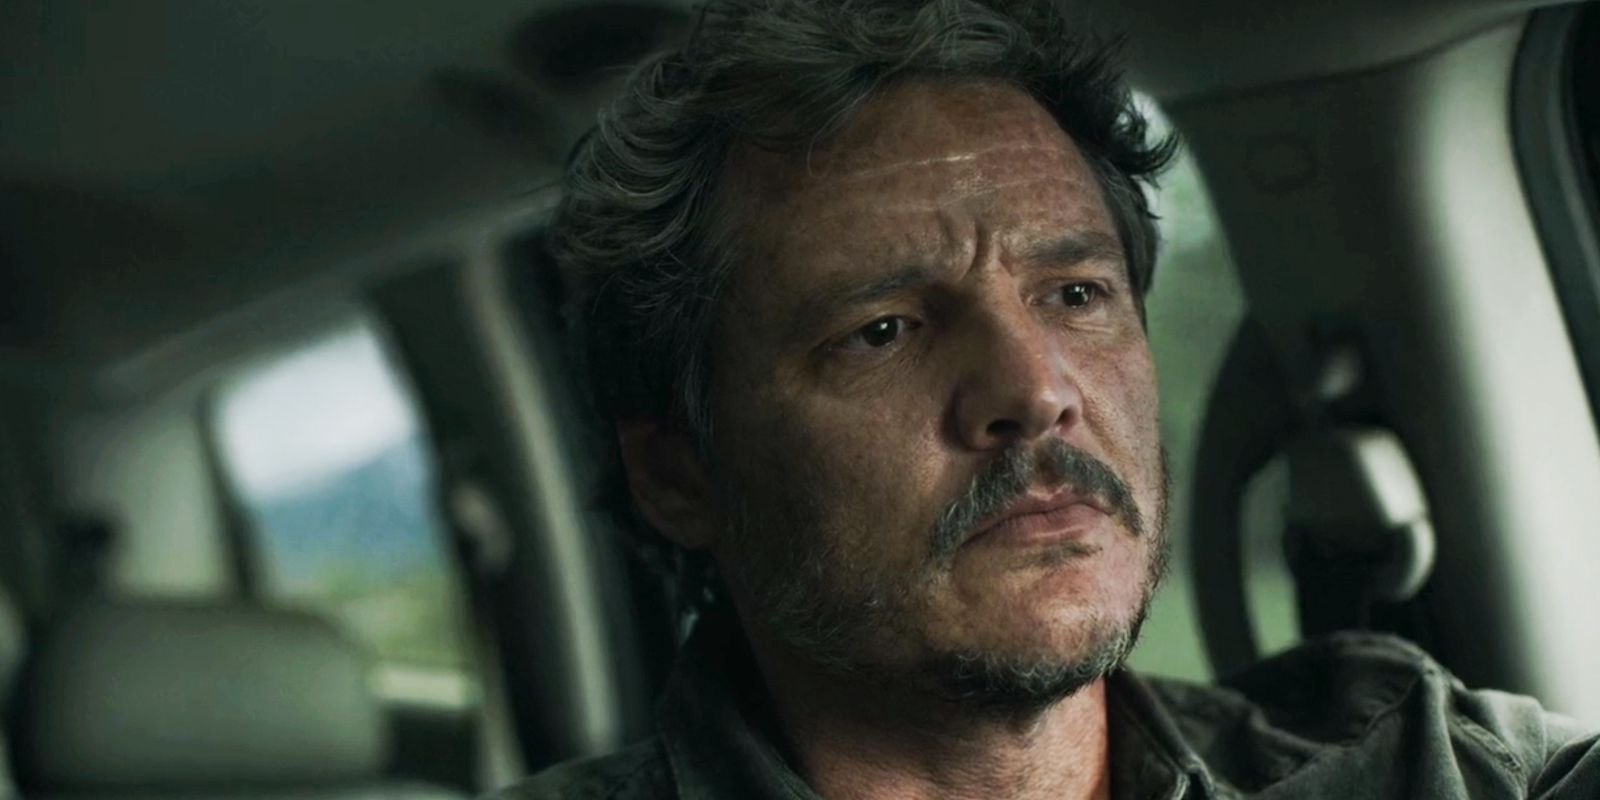 Pedro Pascal is Joel in The Last of Us TV Show - Indiegala Blog